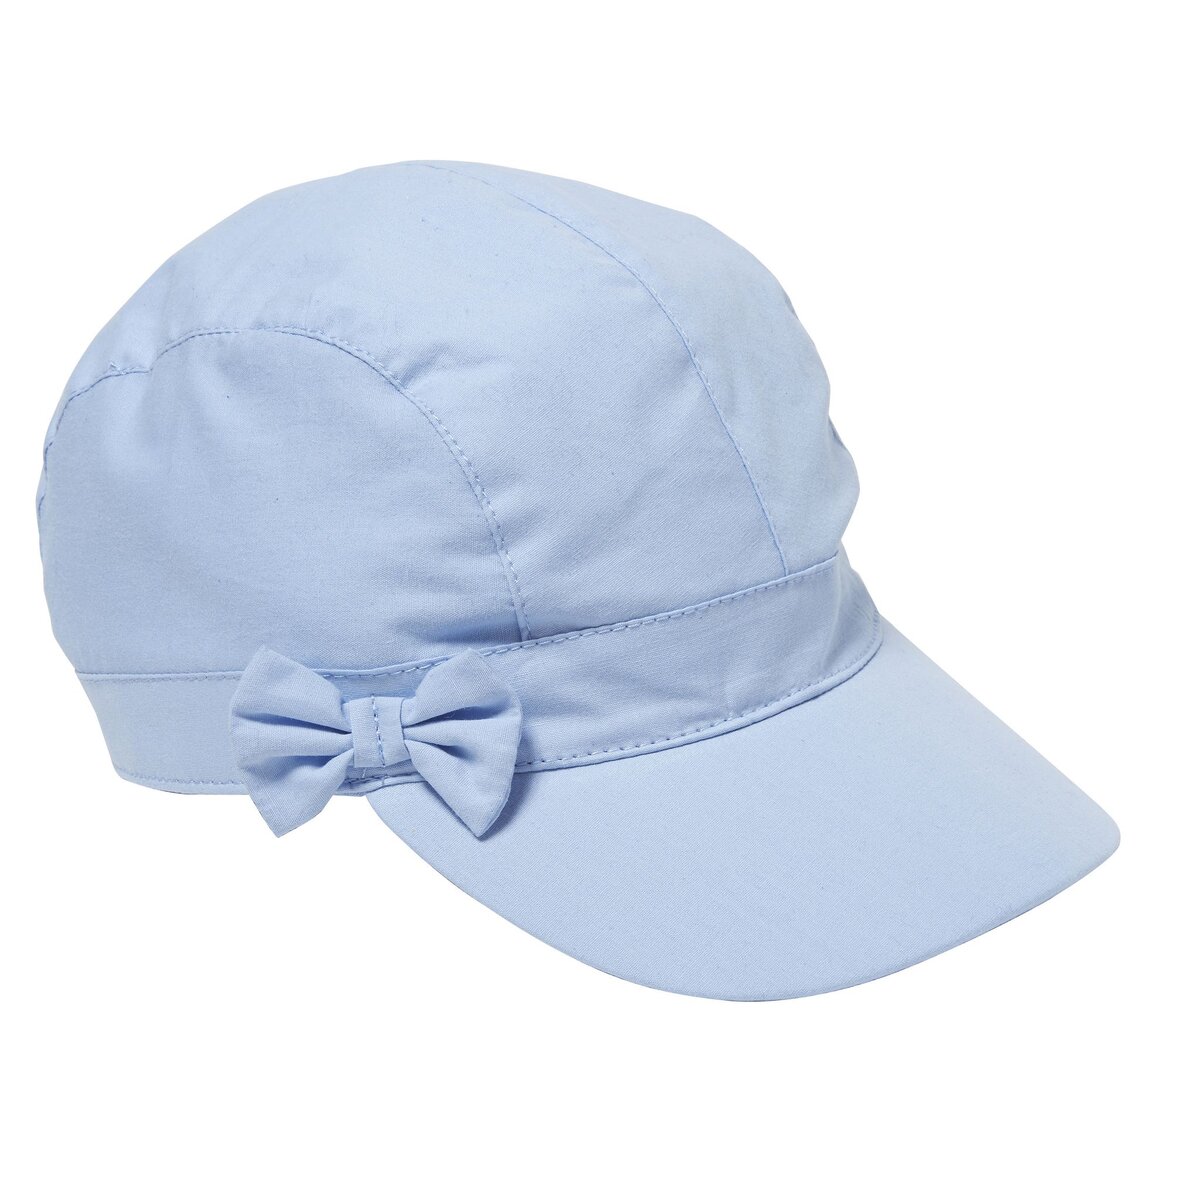 IN EXTENSO Casquette fille